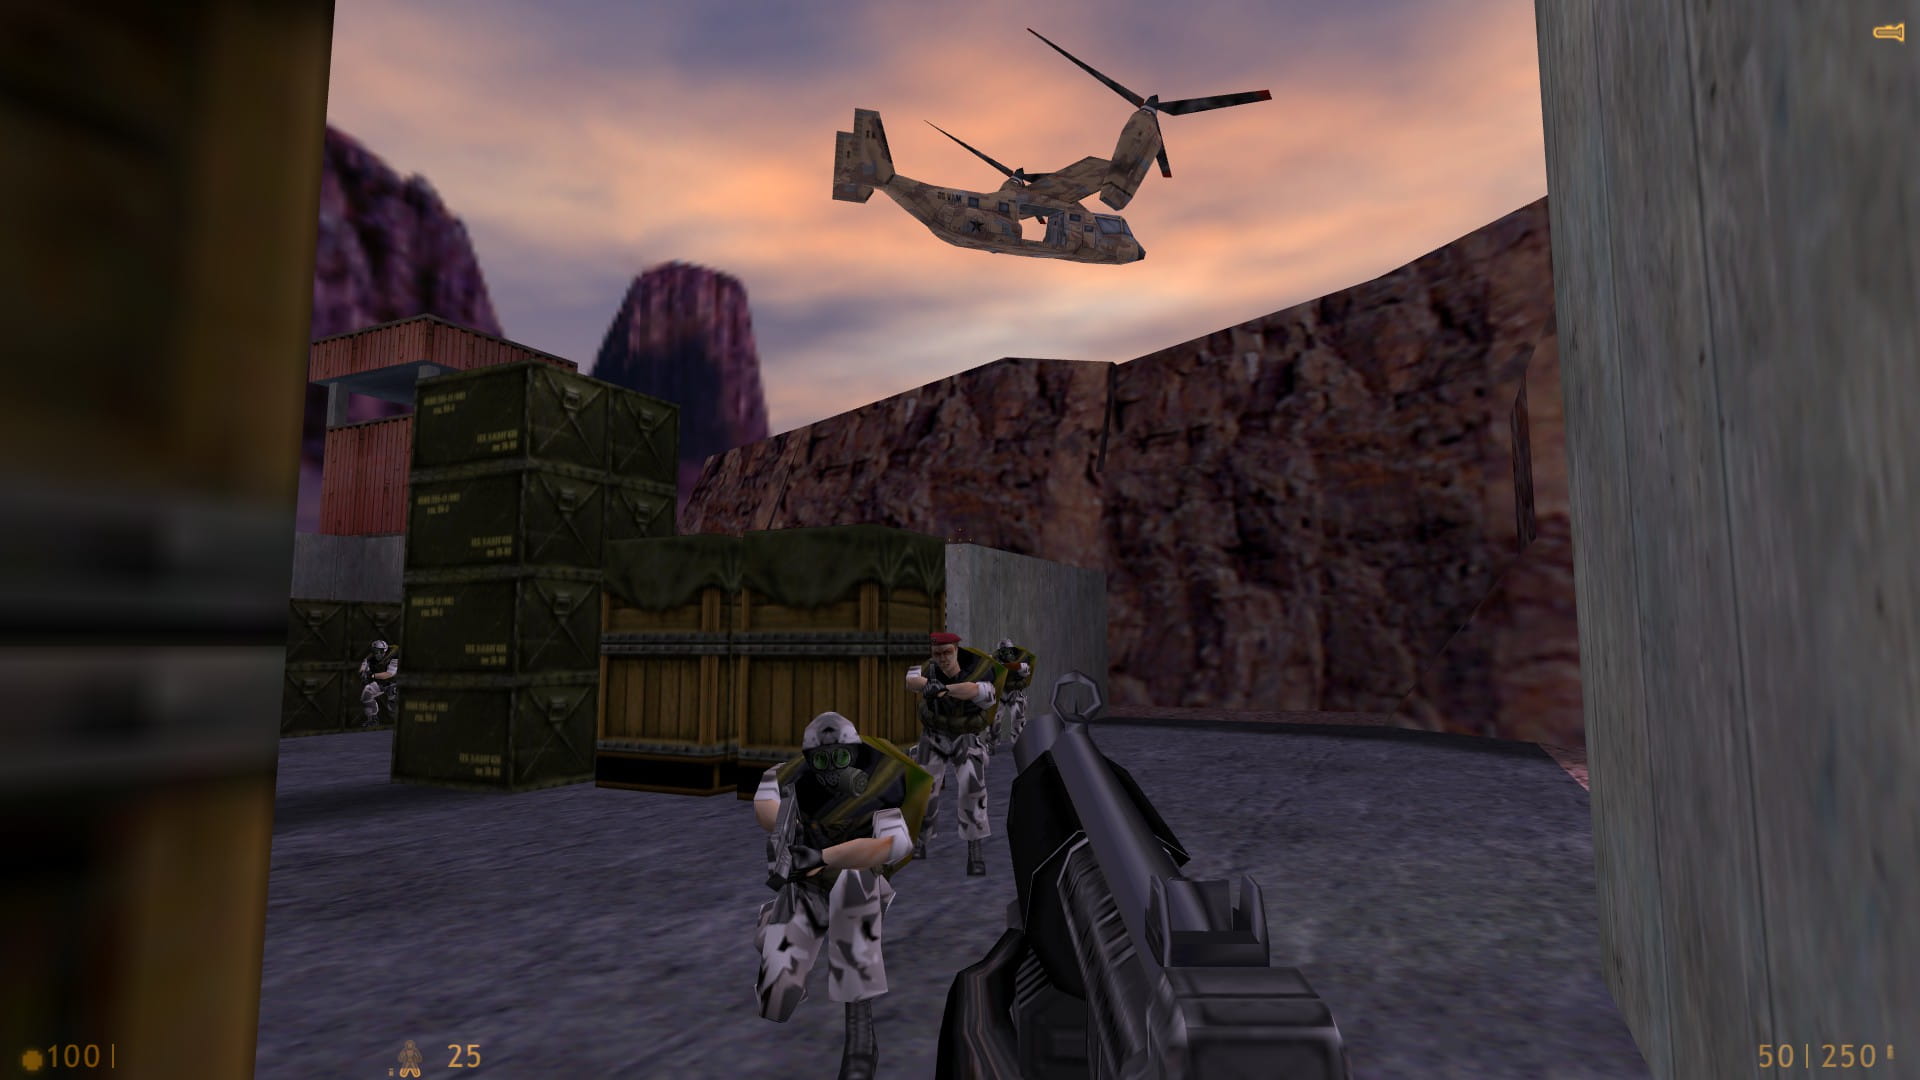 A screenshot of Half-Life. On the surface of Black Mesa, a squad of Marines aims at the player while an Osprey aircraft flies by overhead.